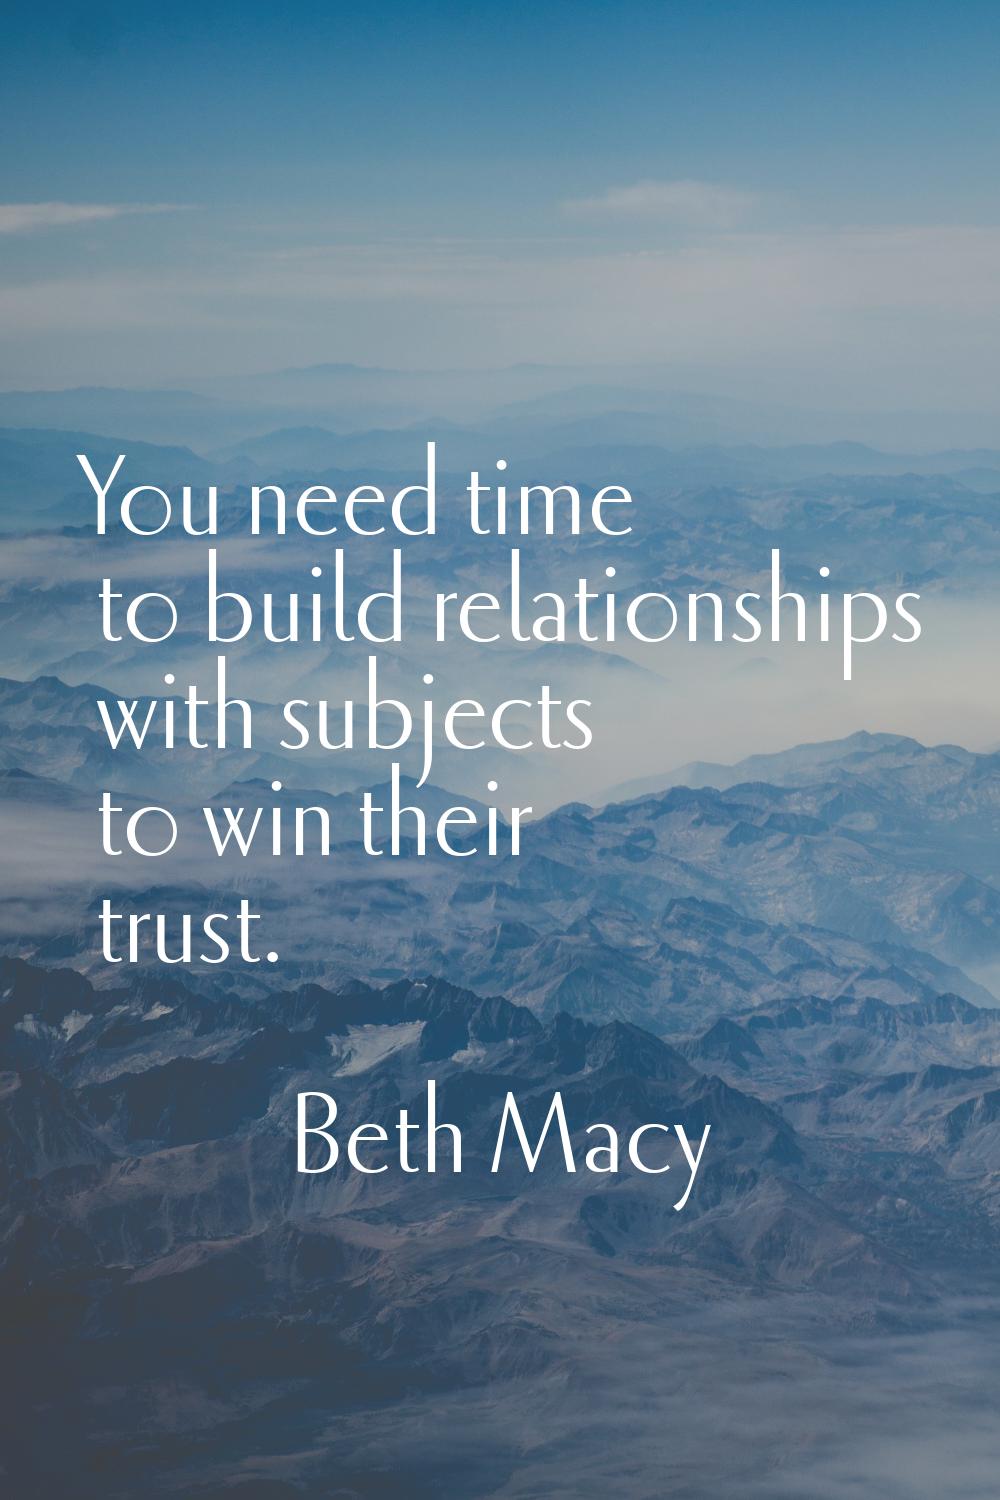 You need time to build relationships with subjects to win their trust.